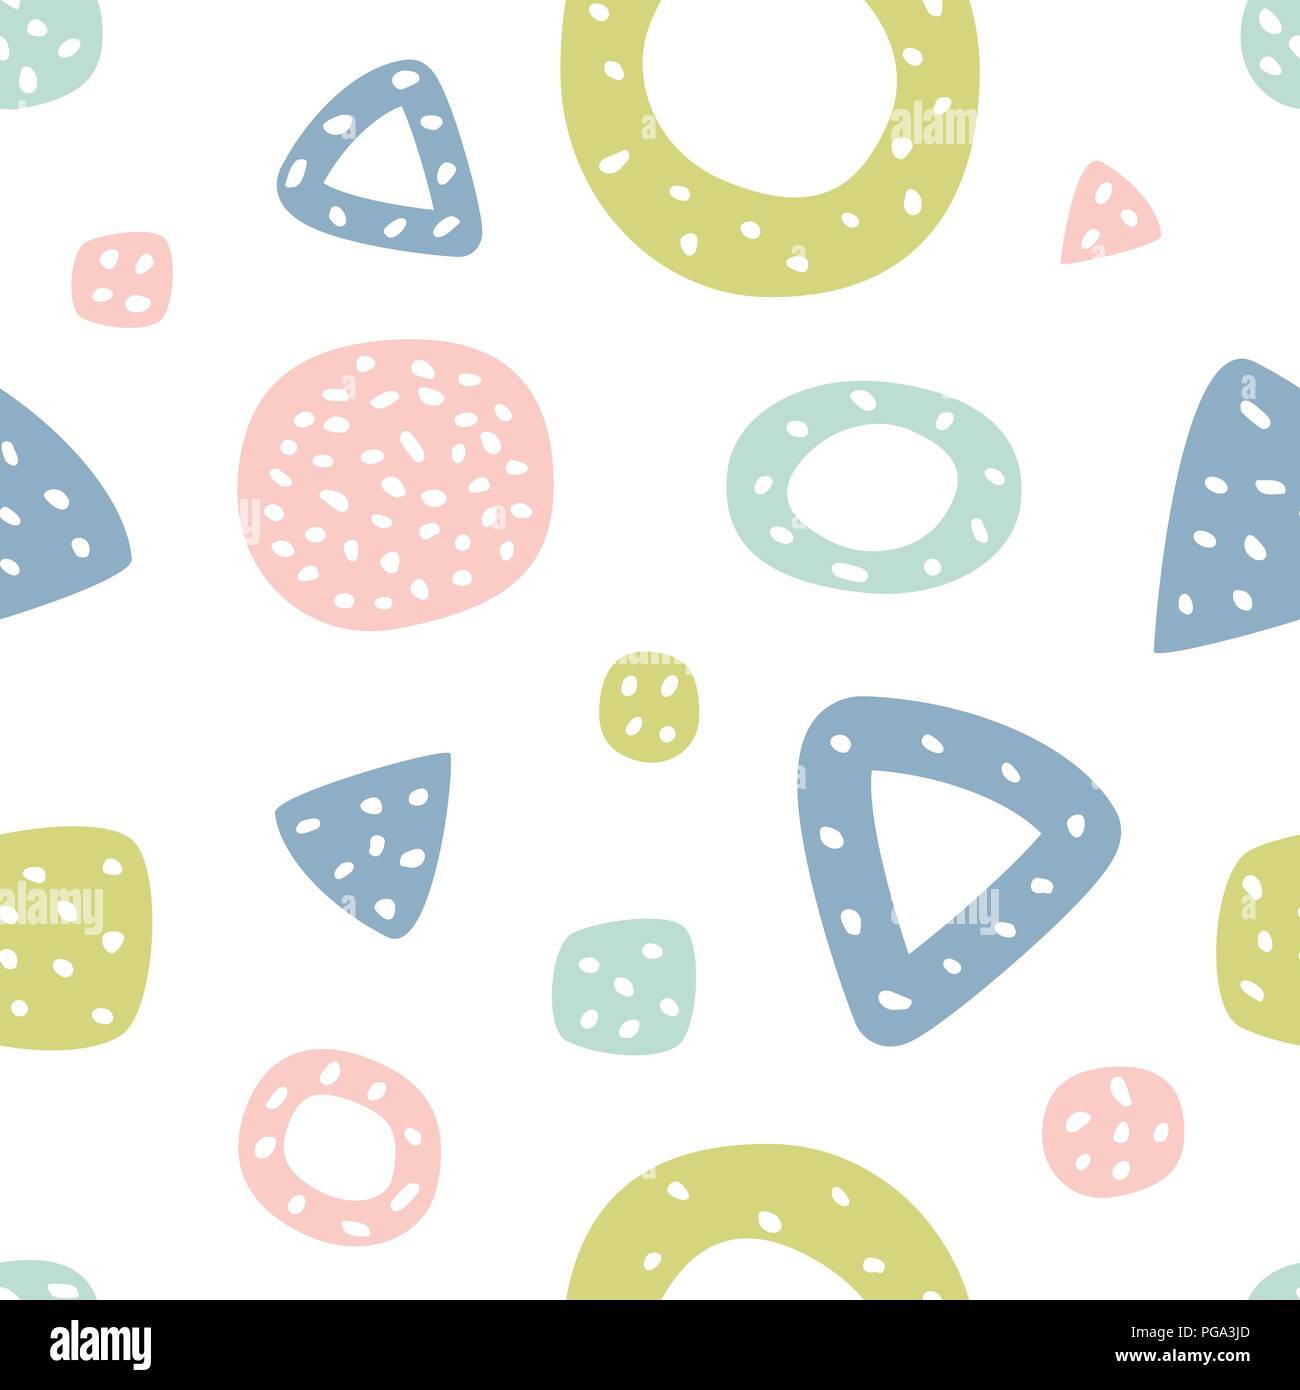 Childish seamless pattern with triangles and polka dots. Creative texture for fabric, textile Stock Vector